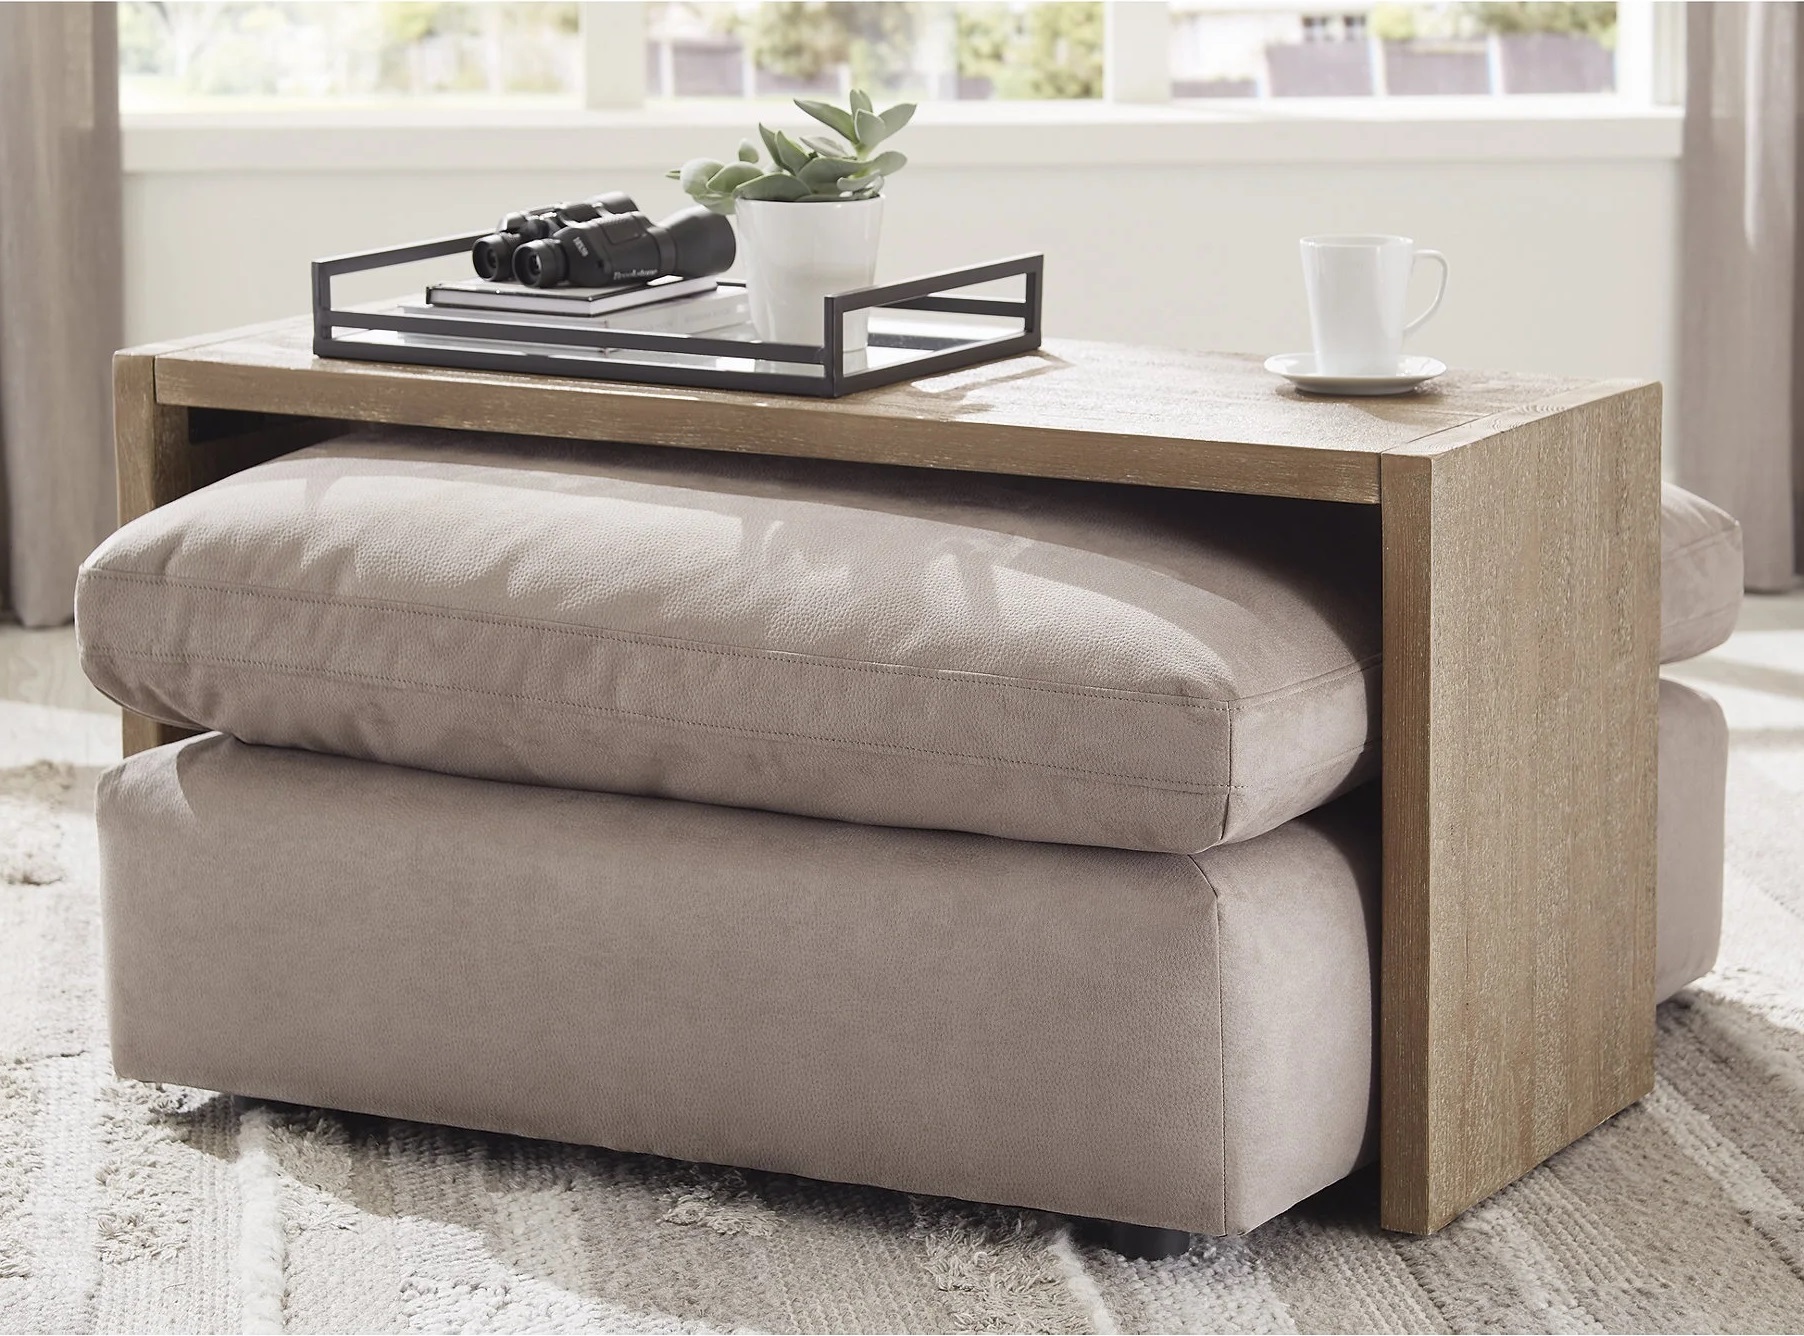 Center Coffee Table With Ottoman Seating